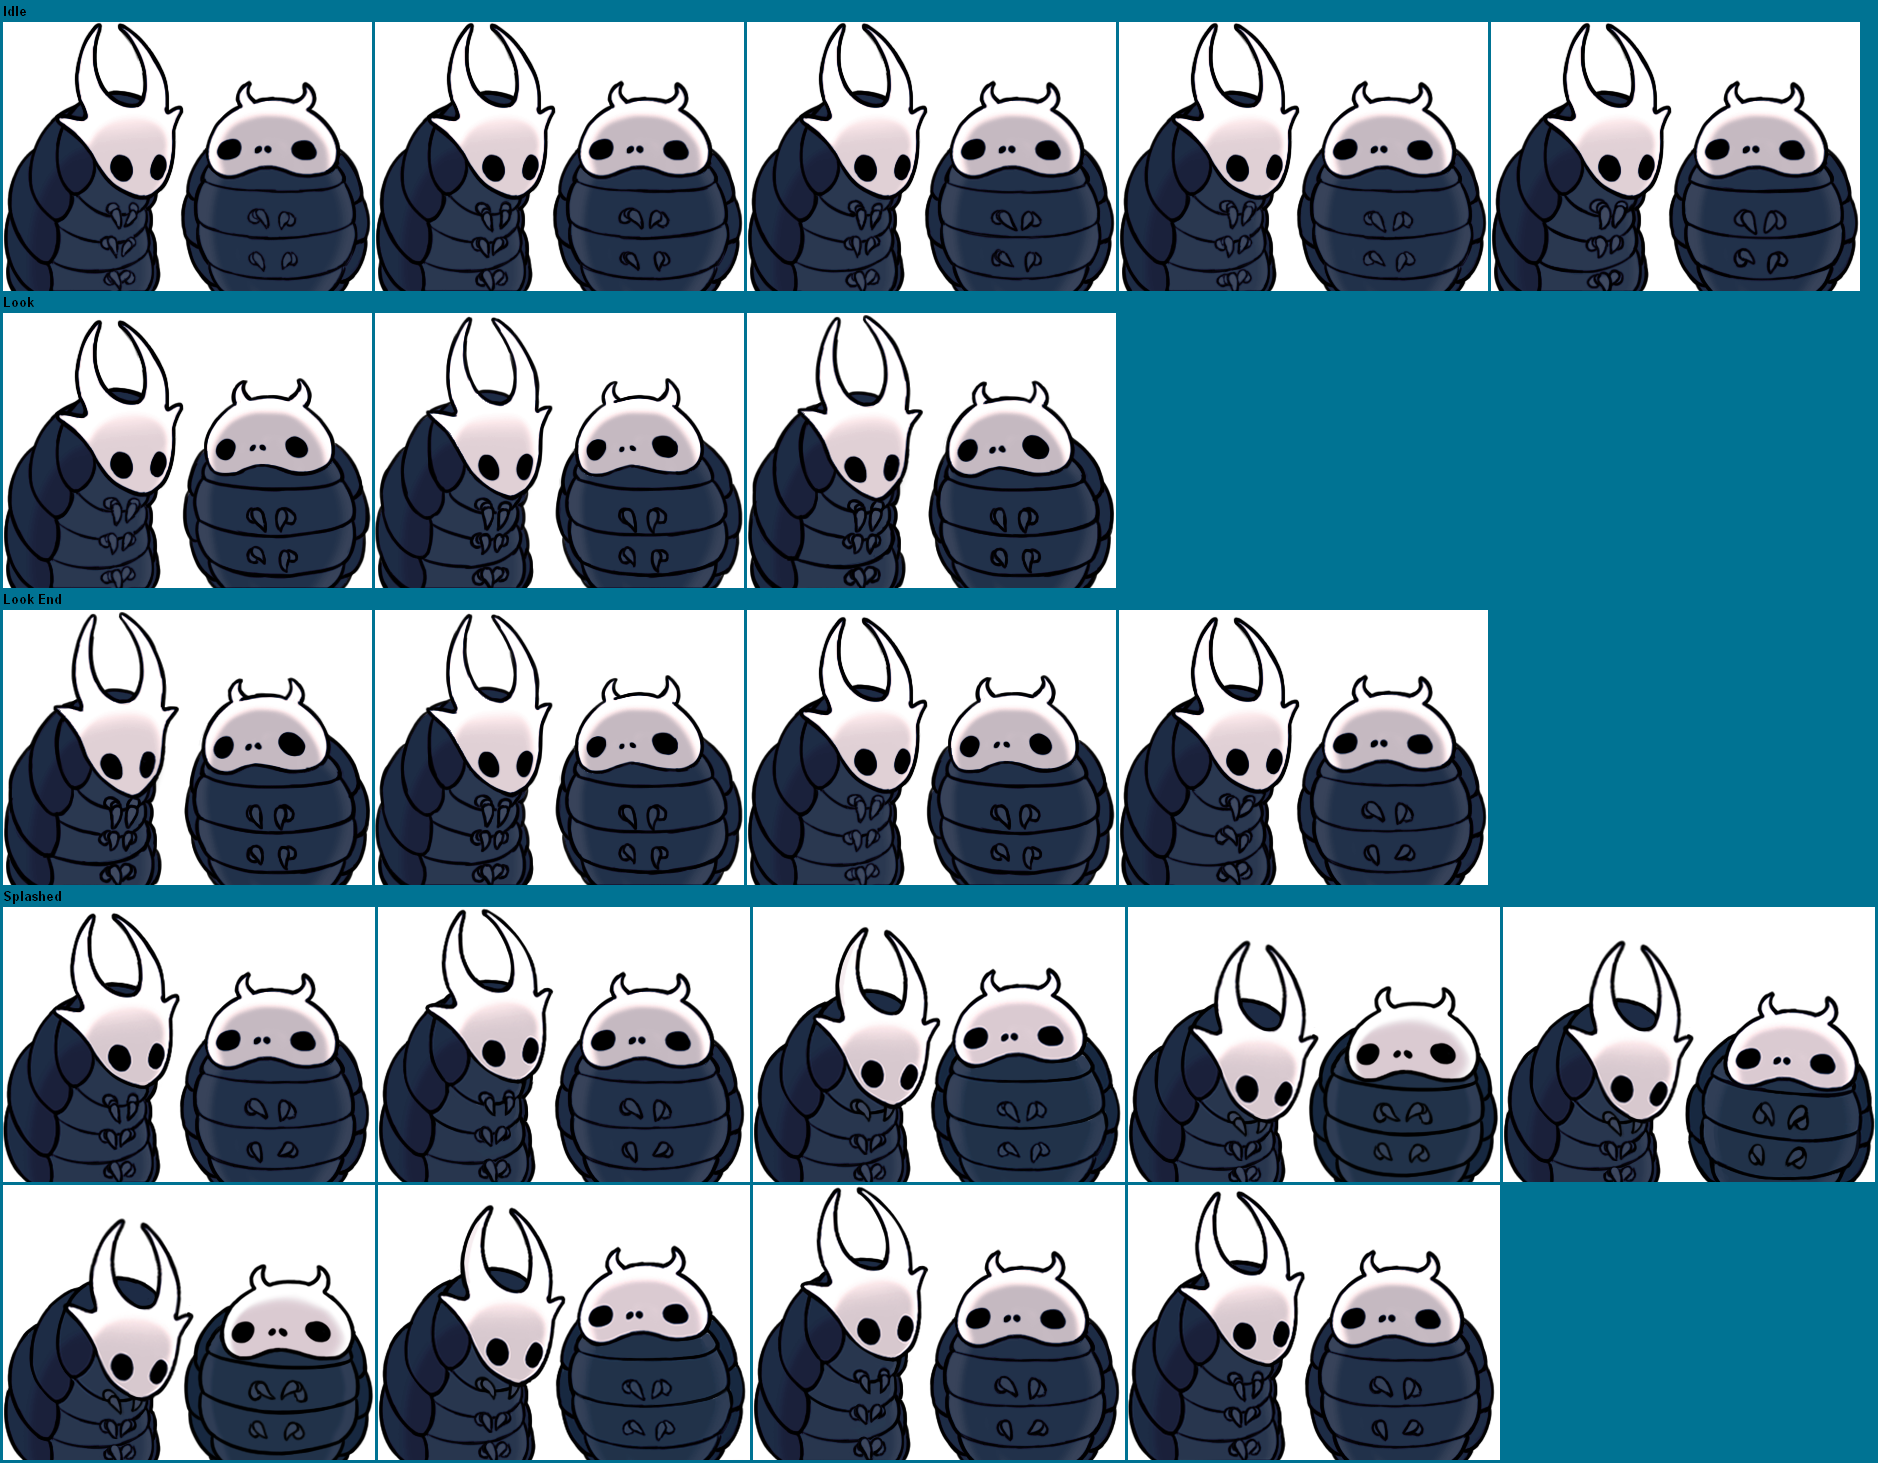 Hollow Knight - Unnamed Hot Spring Bugs